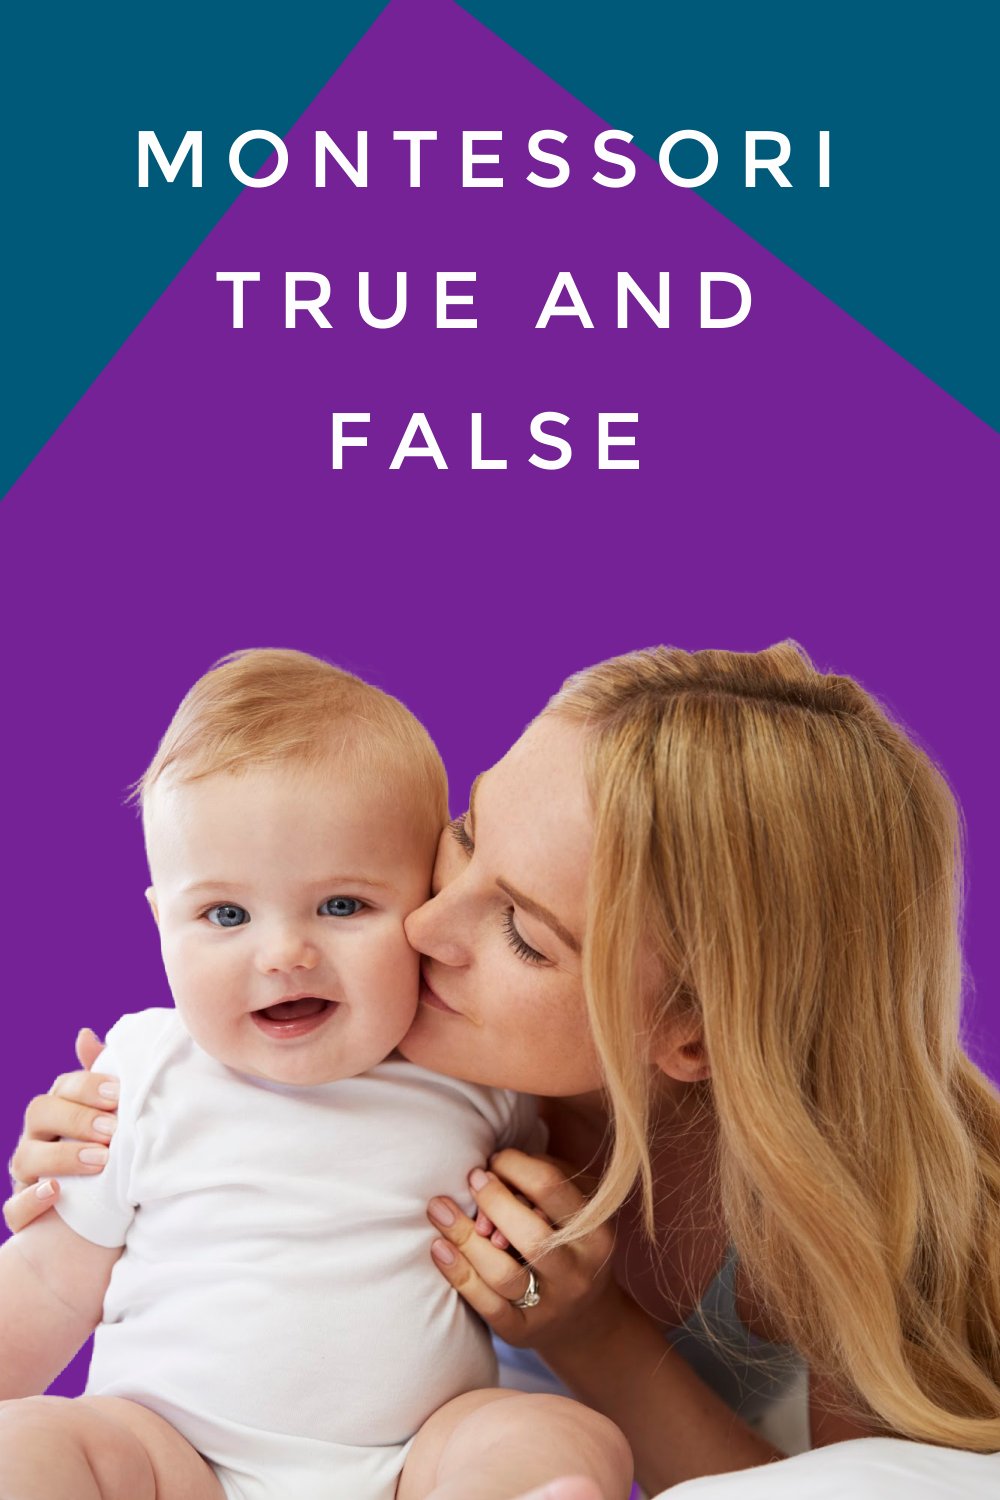 In this Montessori parenting podcast, we answer true and false Montessori parenting questions including whether Montessori is right for every child.